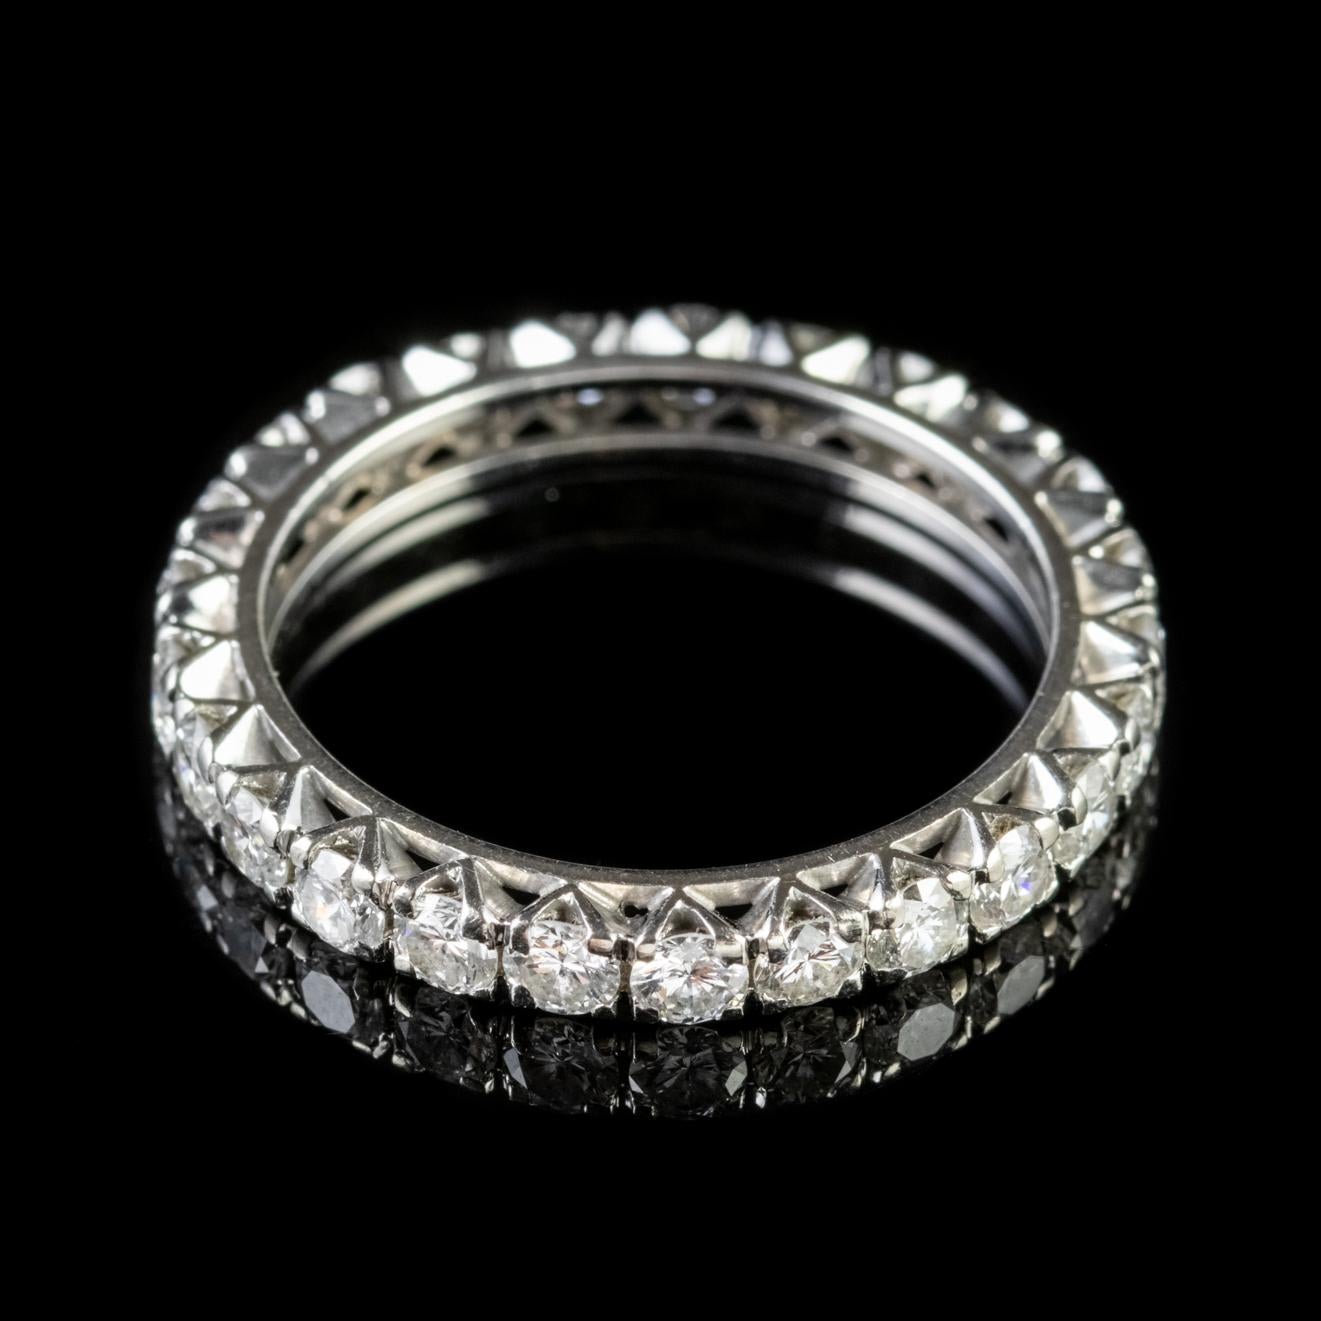 A stunning Art Deco full eternity ring lined with superb SI1 clarity Diamonds which sparkle with immense beauty around the outer circumference totalling to approx. 1.70ct. 

Eternity rings have been given as a love token throughout history with